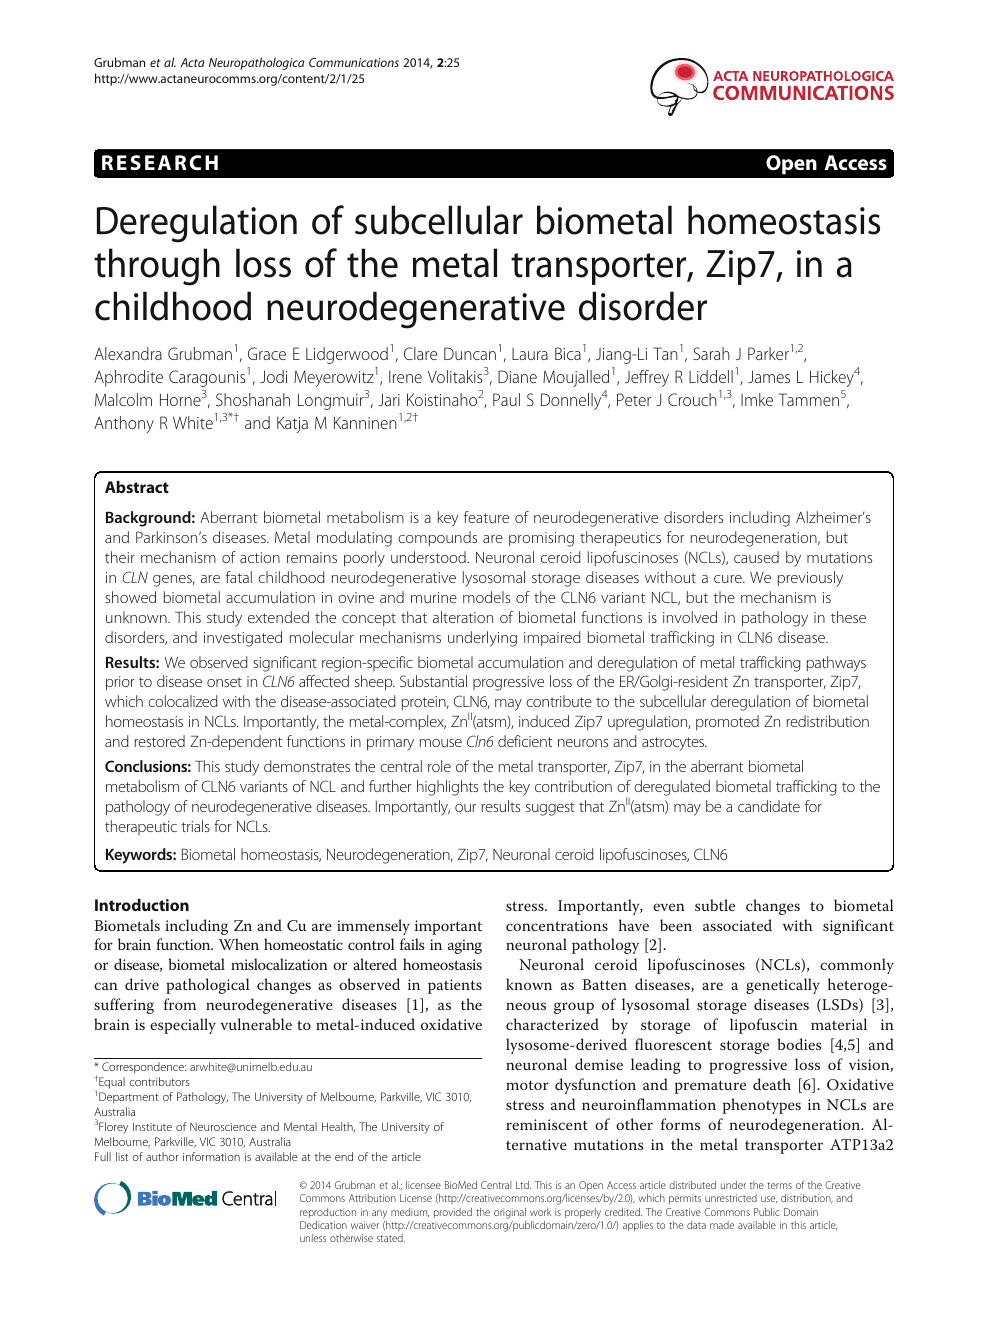 Deregulation Of Subcellular Biometal Homeostasis Through Loss Of The Metal Transporter Zip7 In A Childhood Neurodegenerative Disorder Topic Of Research Paper In Biological Sciences Download Scholarly Article Pdf And Read For